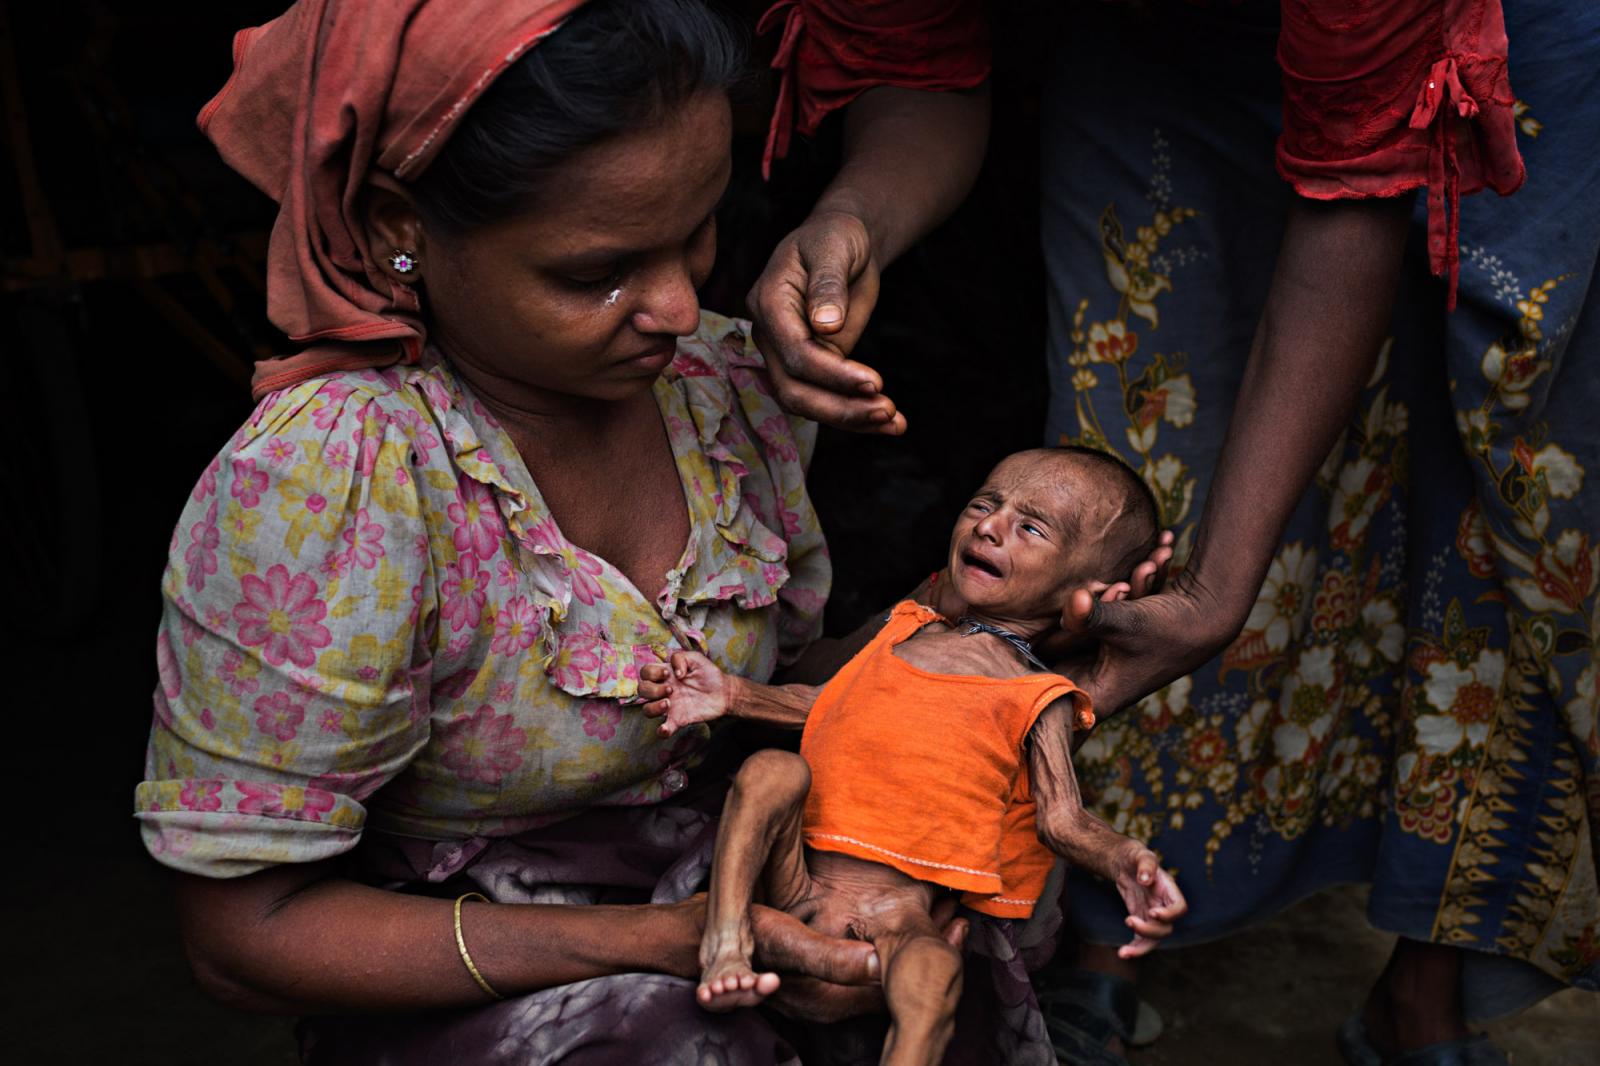  A Rohingya woman cries while h...s from operating in the camps. 